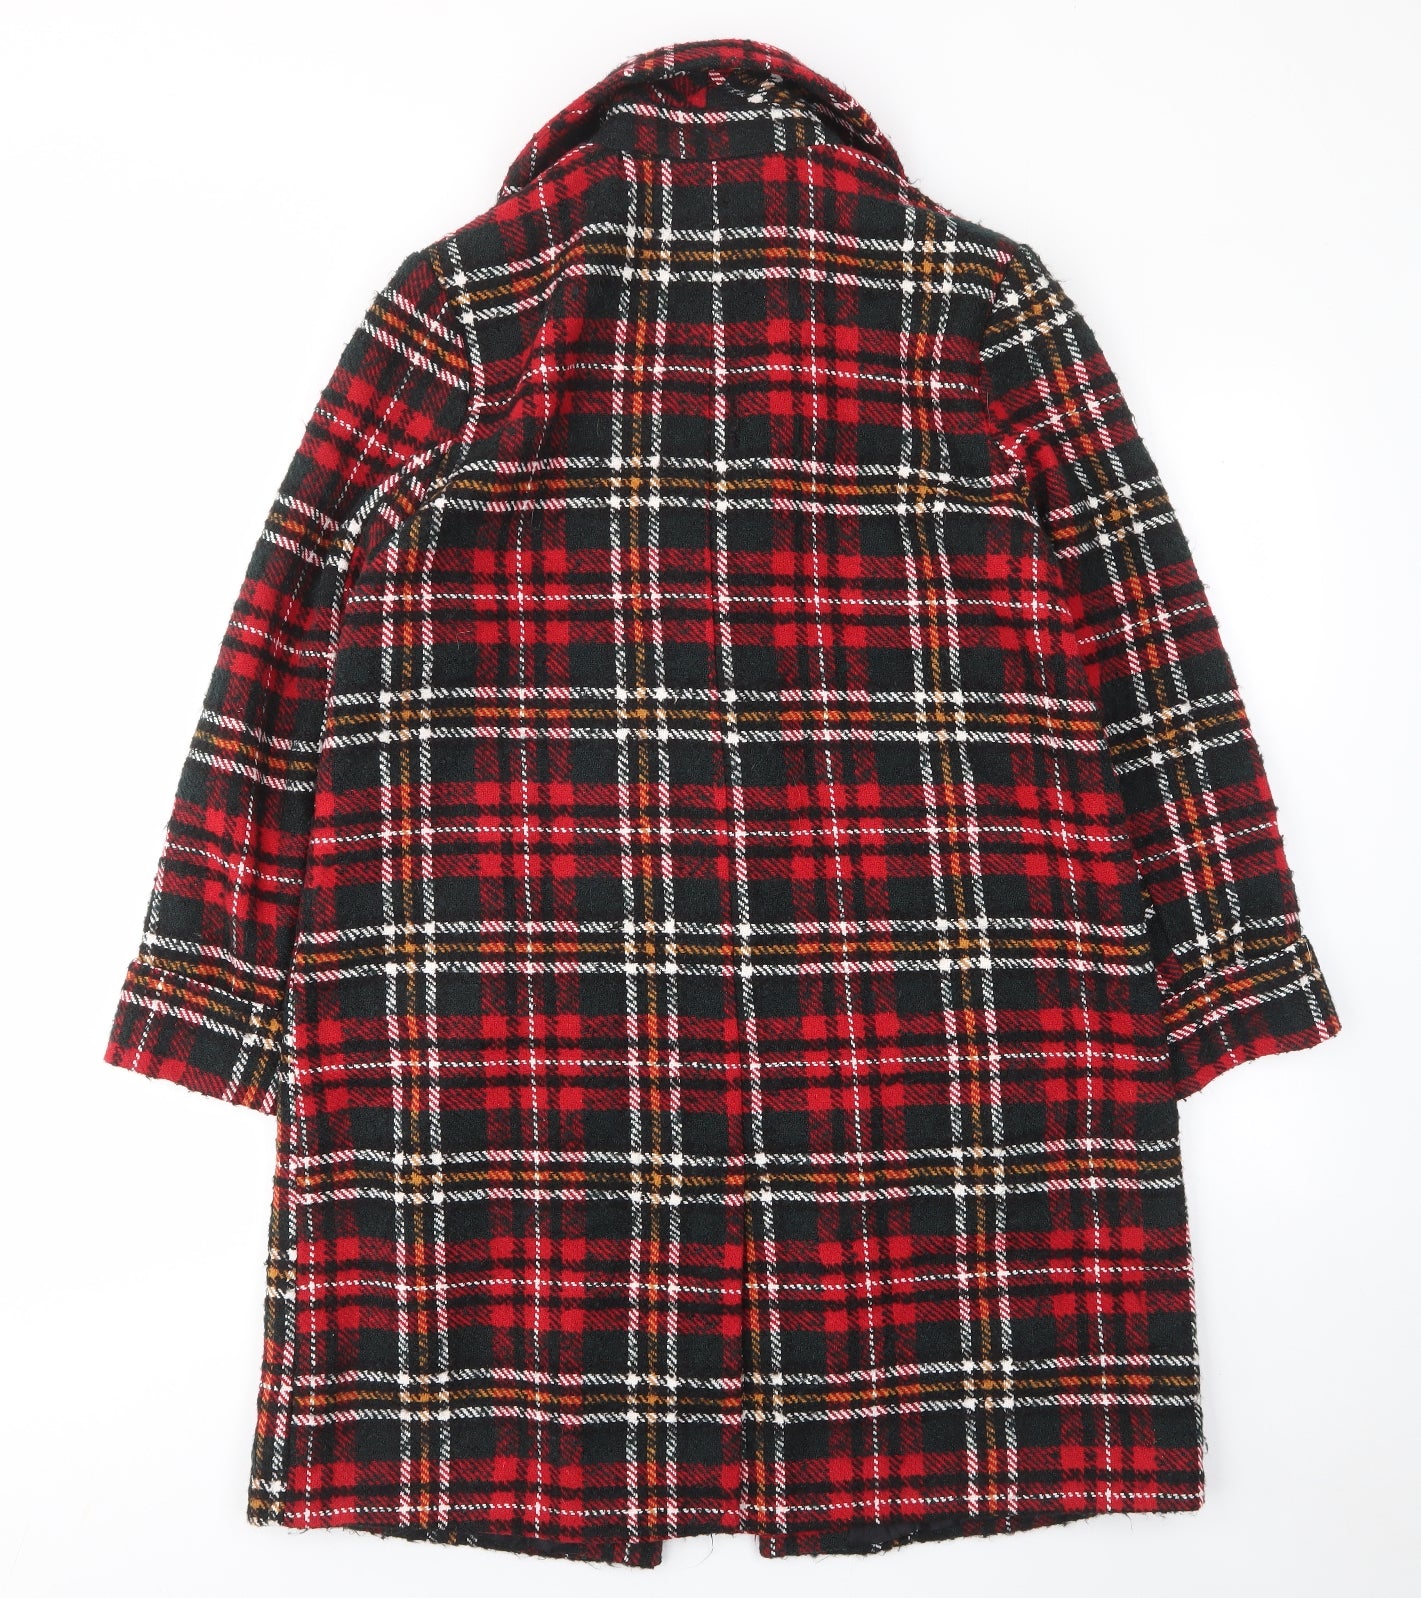 River Island Womens Red Plaid Overcoat Coat Size 14 Snap - Pockets, Collared, Lined